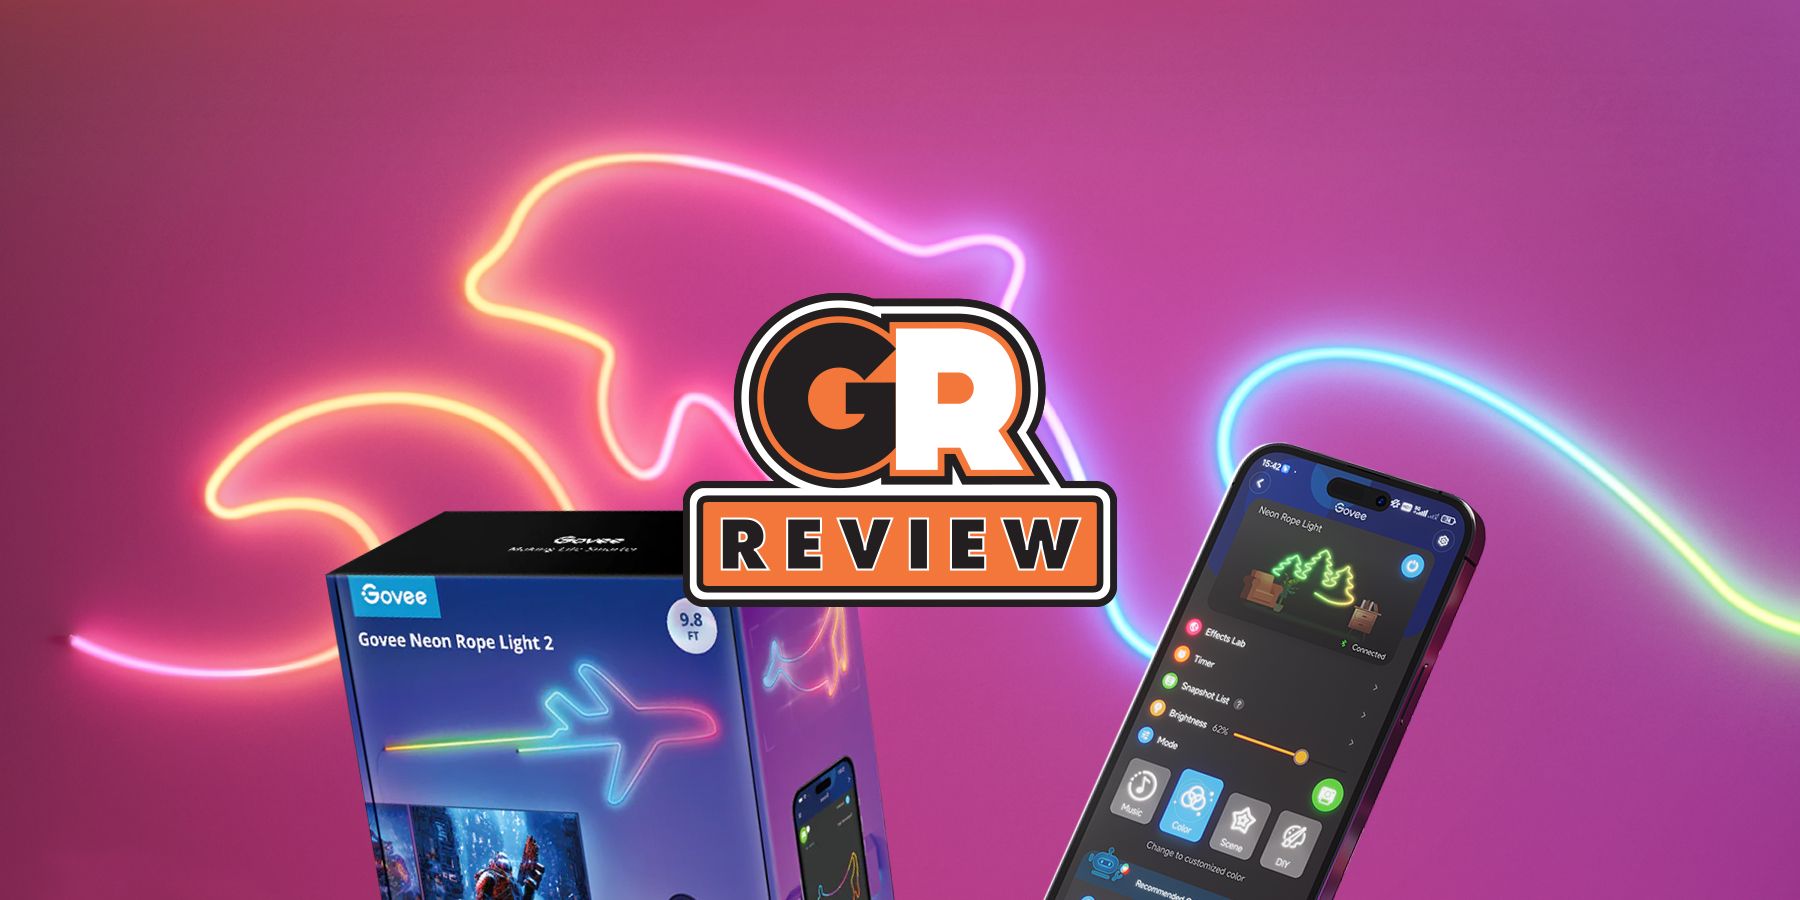 Govee Neon Rope Light 2 Review